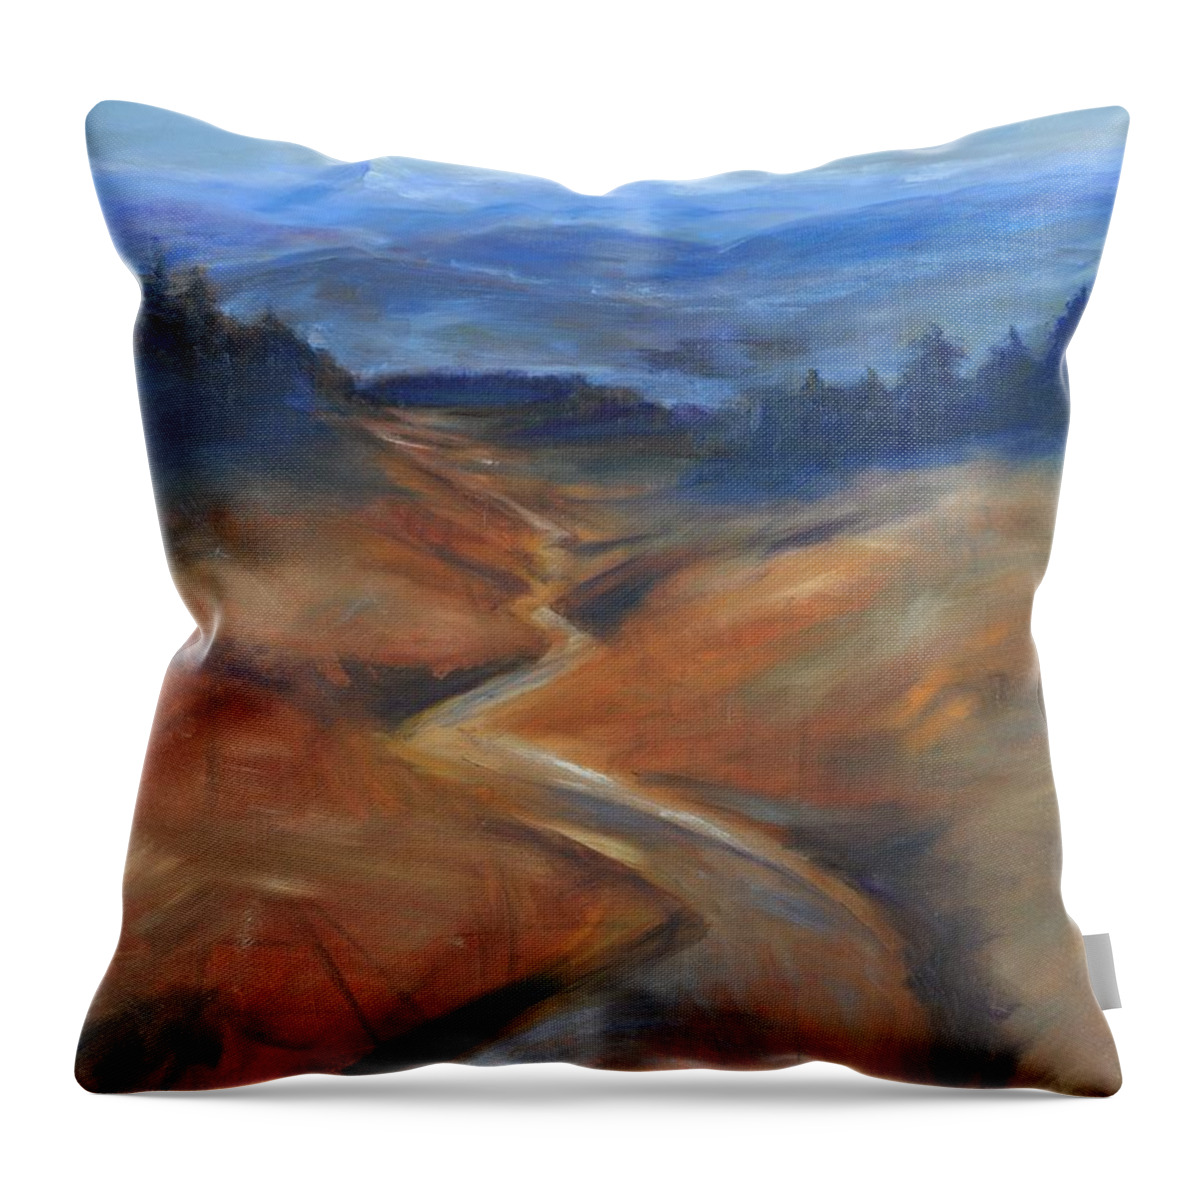 Mt Hood Throw Pillow featuring the painting View Of Mt Hood by Sally Simon